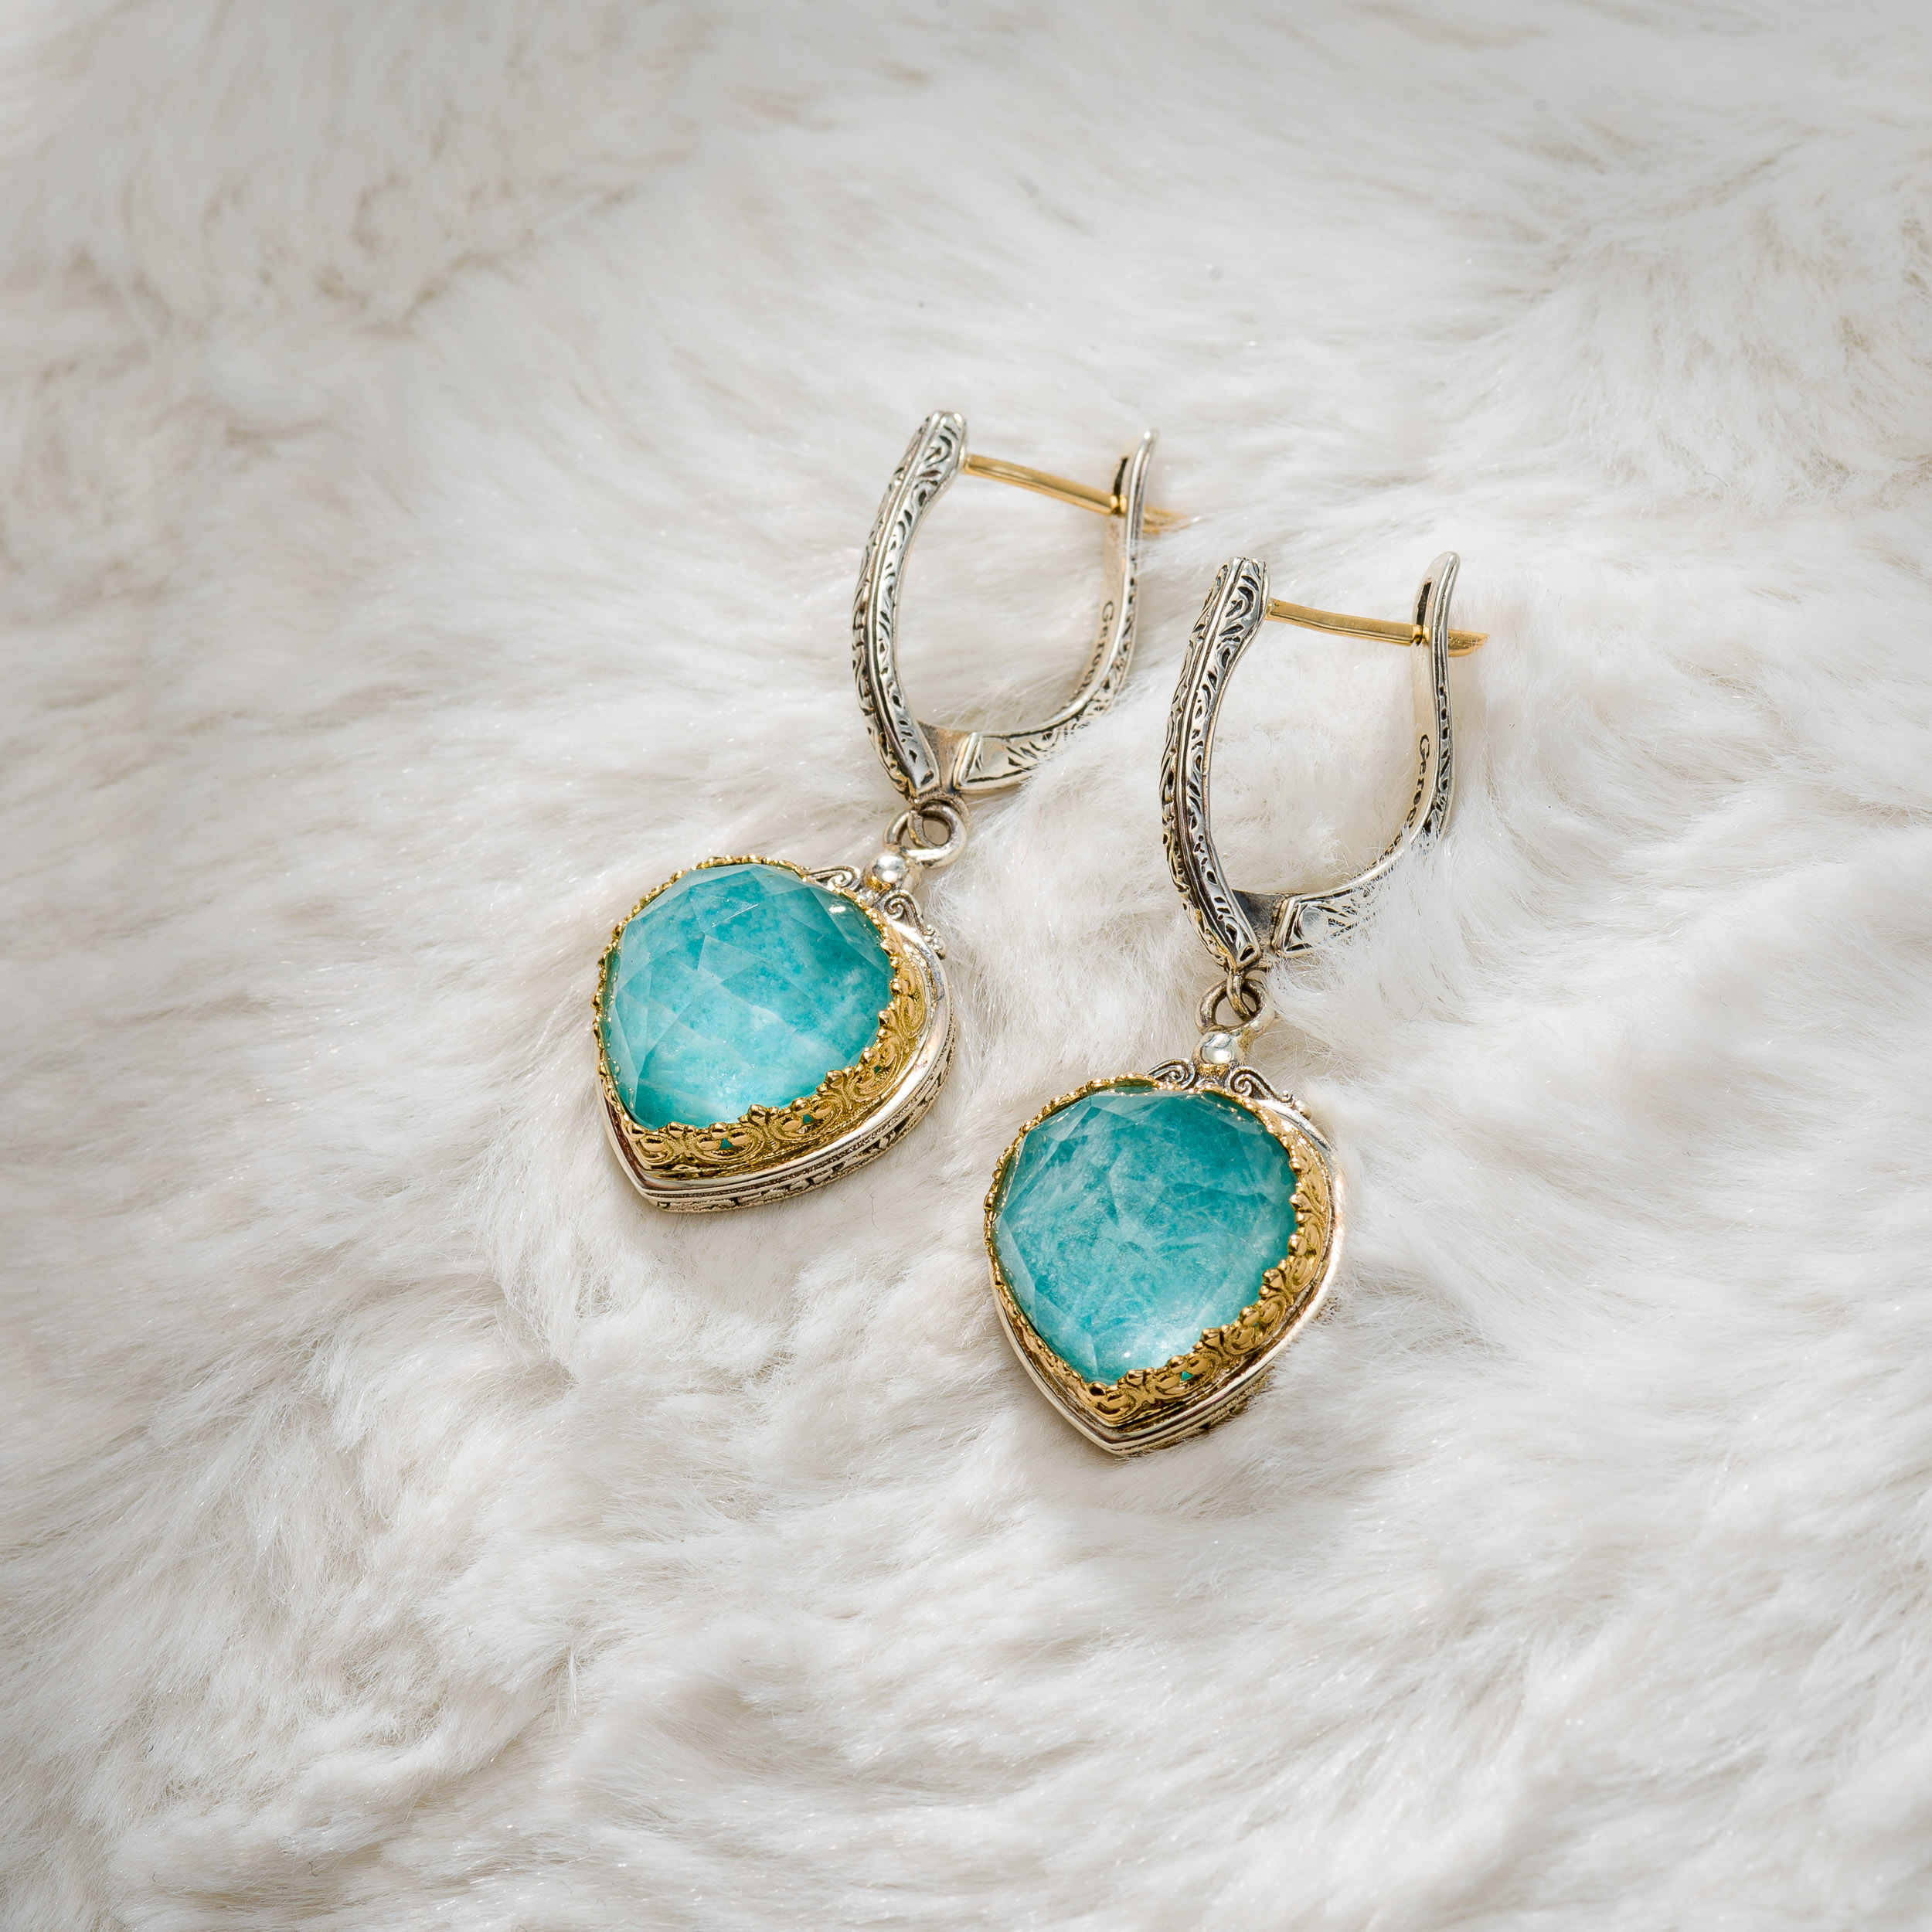 Iris Heart earrings in 18K Gold and Sterling Silver with amazonite